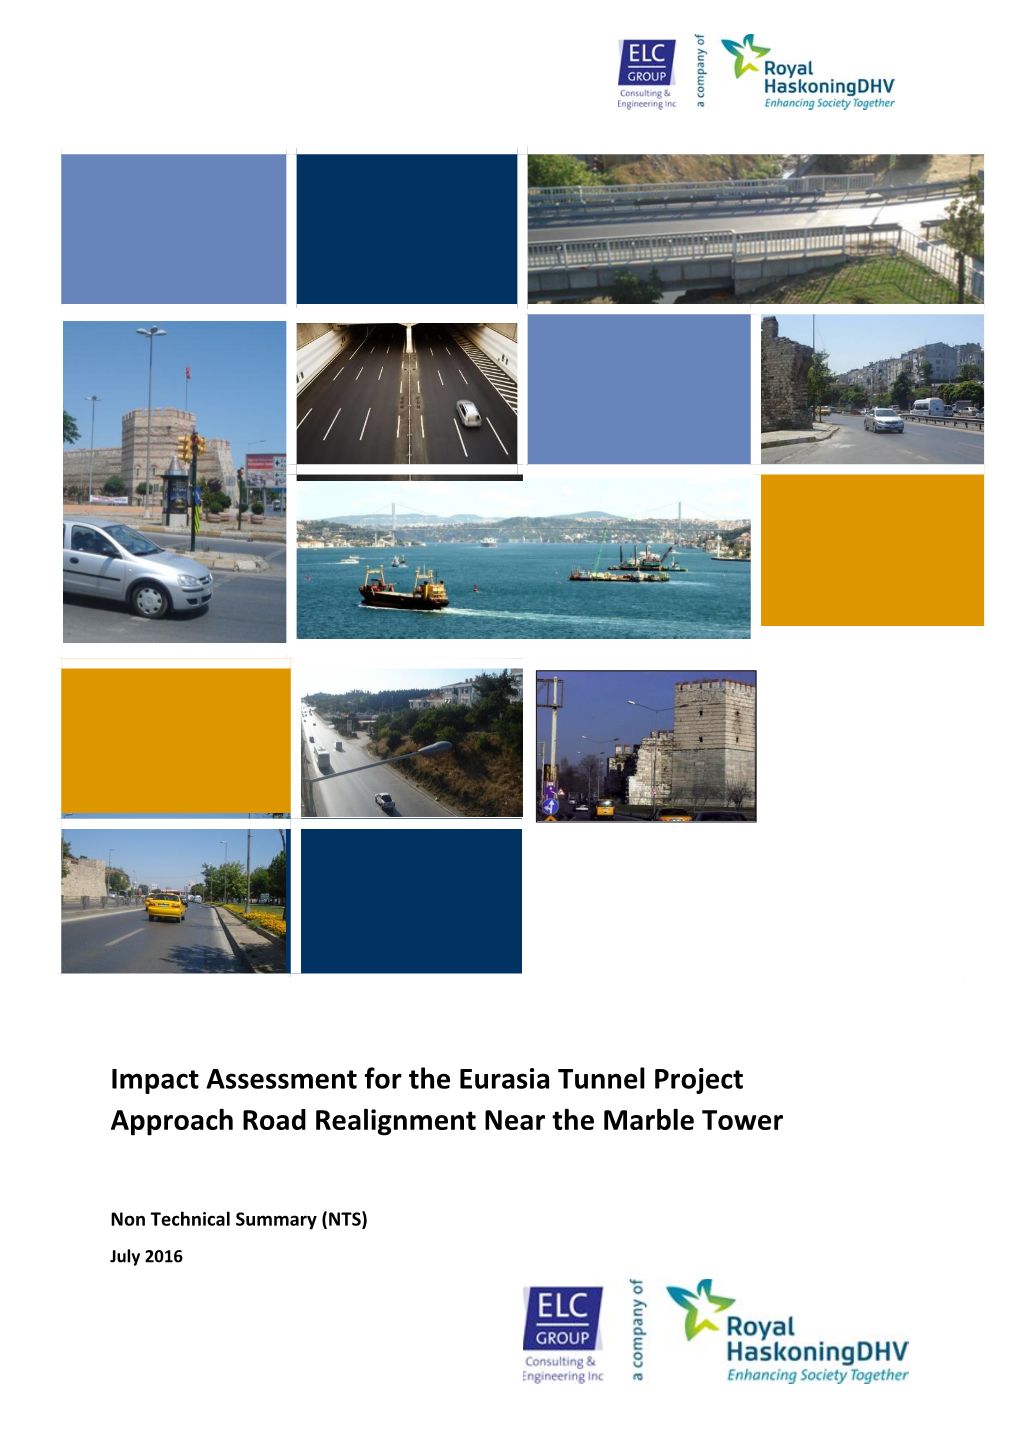 Impact Assessment for the Eurasia Tunnel Project Approach Road Realignment Near the Marble Tower